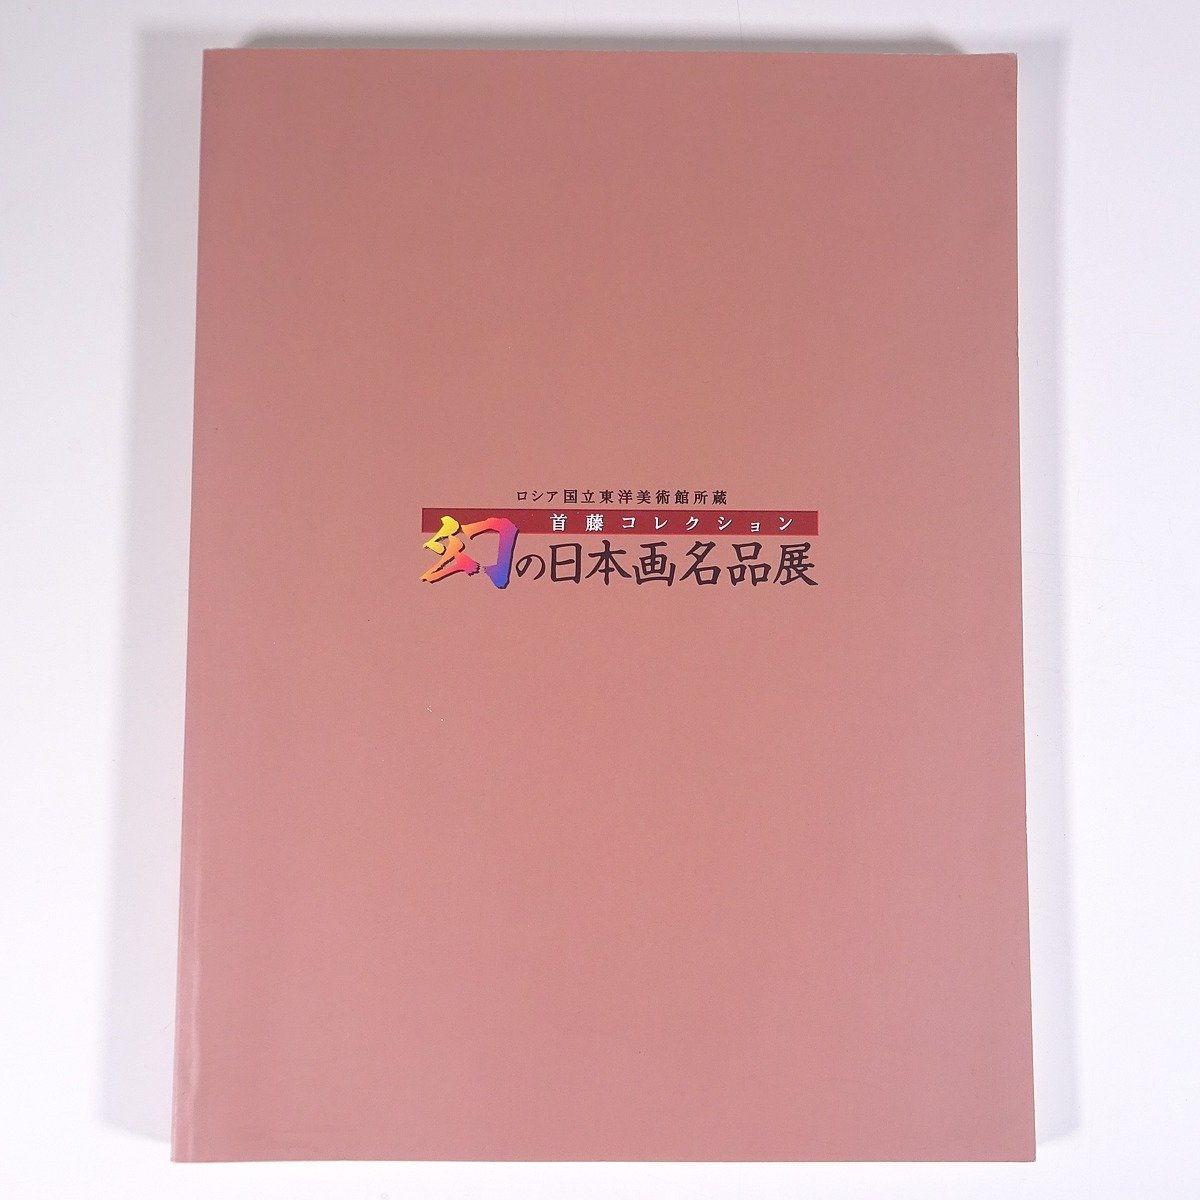 The Sudo Collection: Masterpieces of Japanese Paintings from the State Museum of Oriental Art, Russia, 1999, large-format book, exhibition, illustrations, catalog, art, fine art, painting, art book, collection of works, Japanese painting, Painting, Art Book, Collection, Catalog